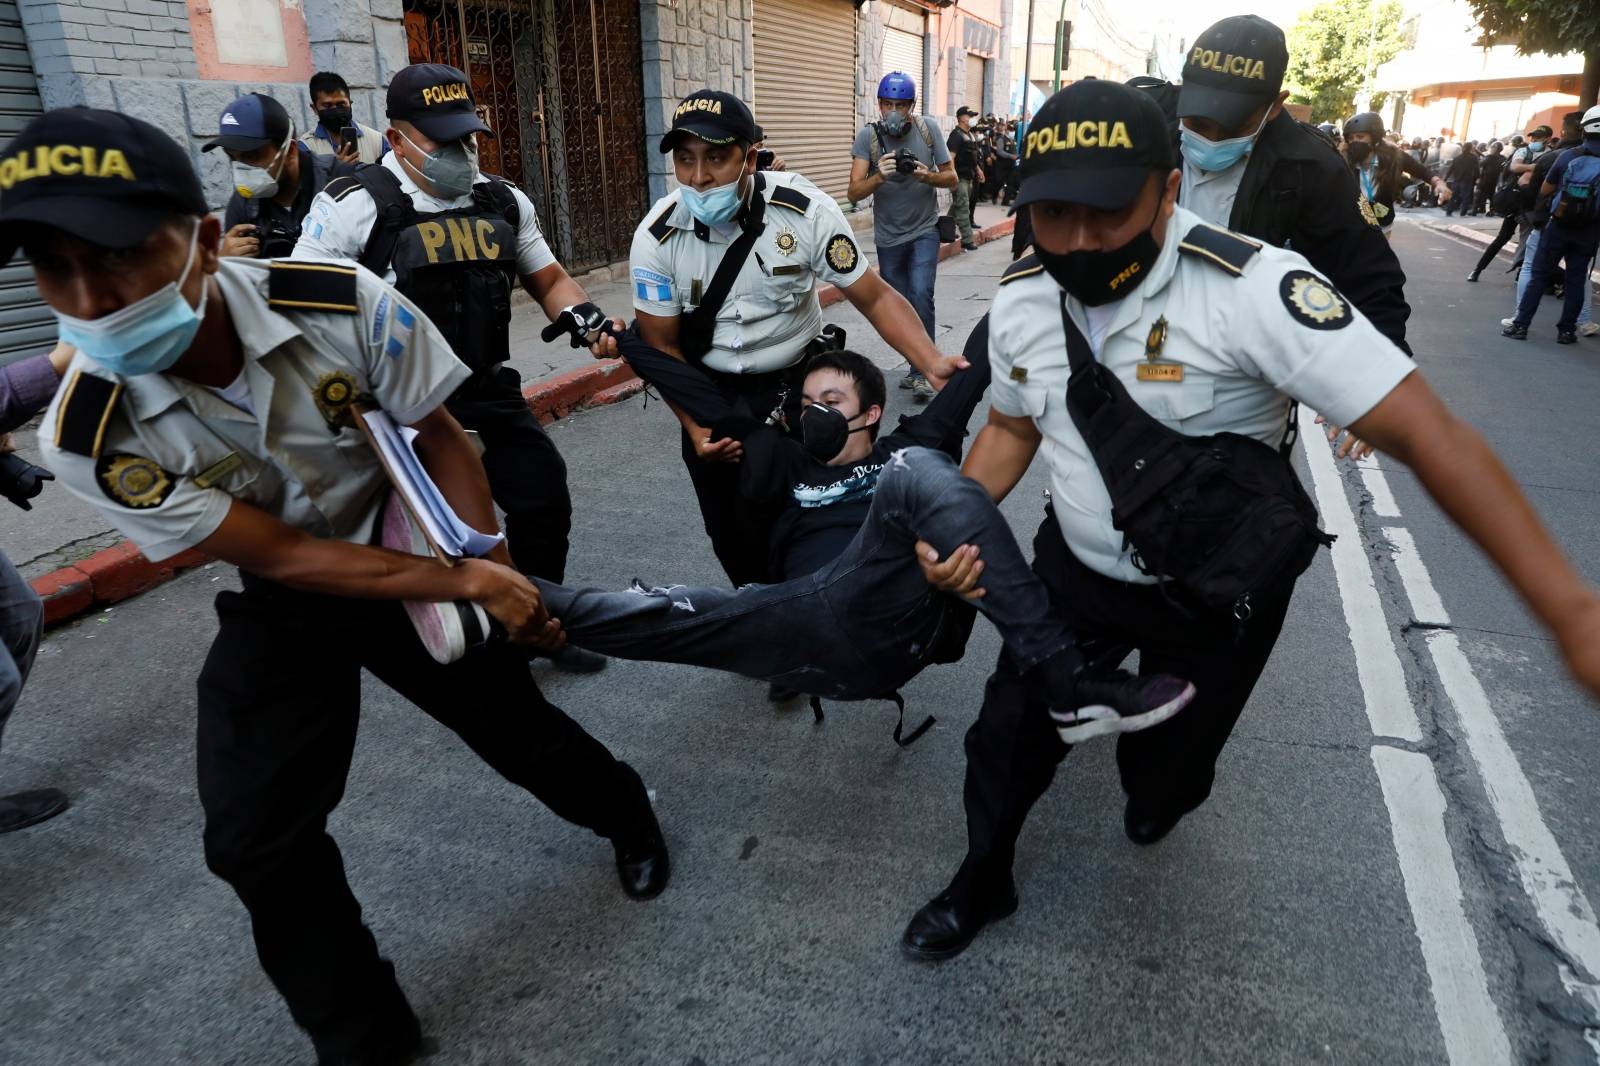 Police officers carry a demonstrator taking part in a protest demanding the resignation of President Alejandro Giammattei, in Guatemala City